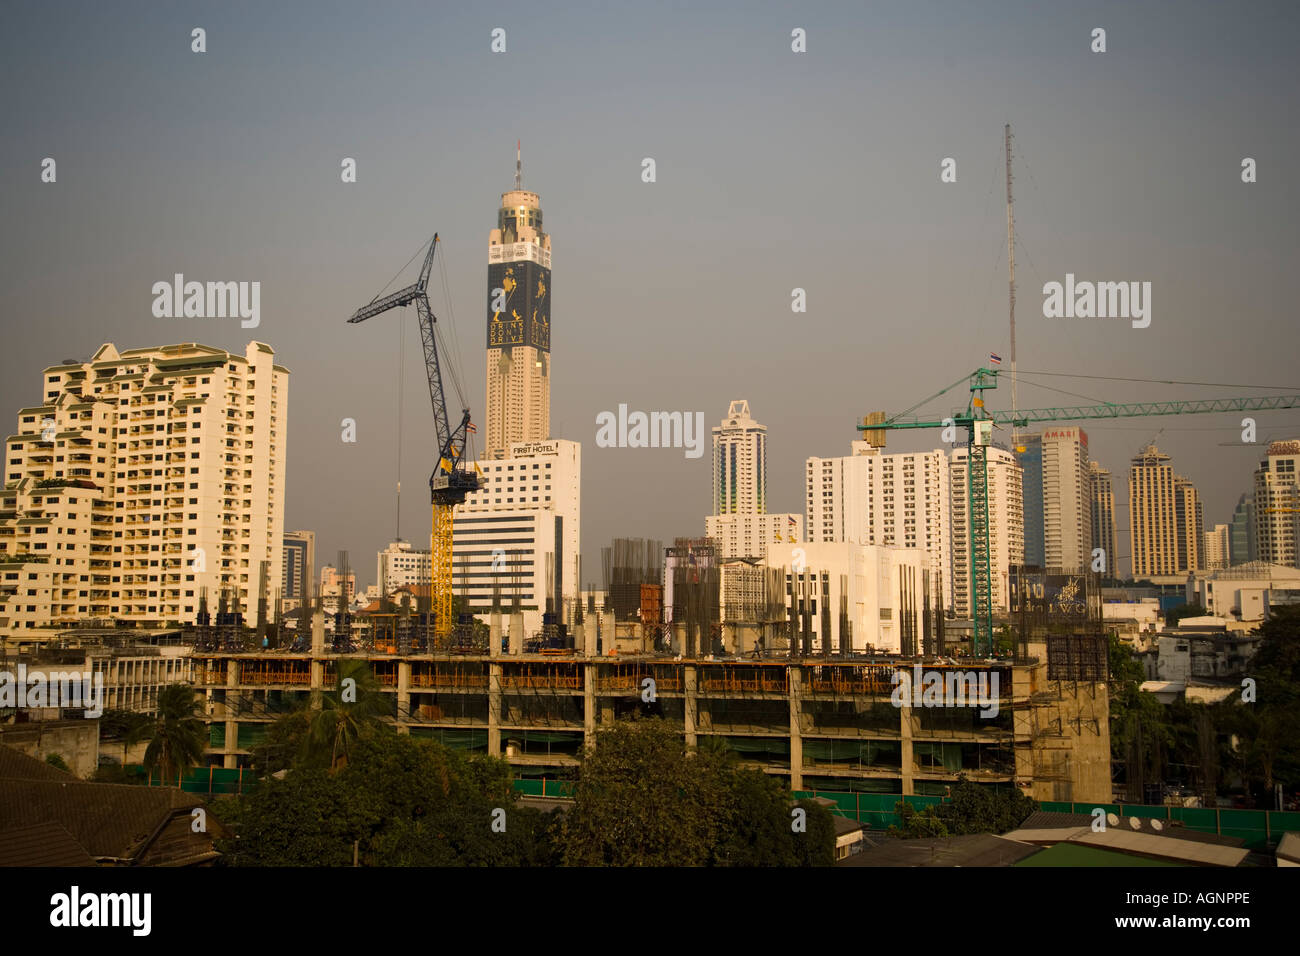 View over a constructions site to Baiyoke Tower II the tallest building in Thailand Ratchathewi Bangkok Thailand Stock Photo